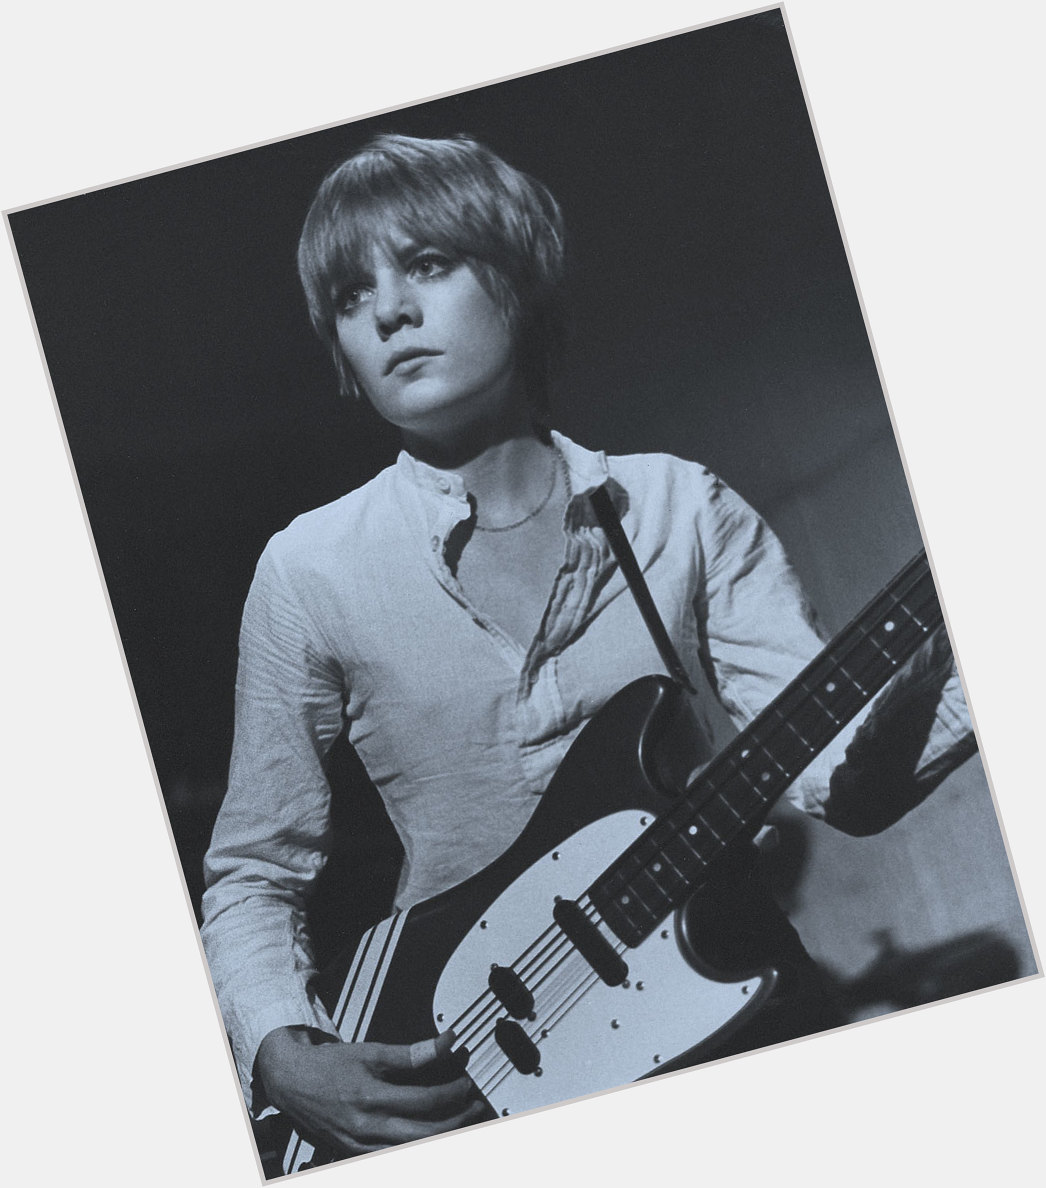 She\s Tina Weymouth and you\re not. Happy 70th birthday to an actual legend. 